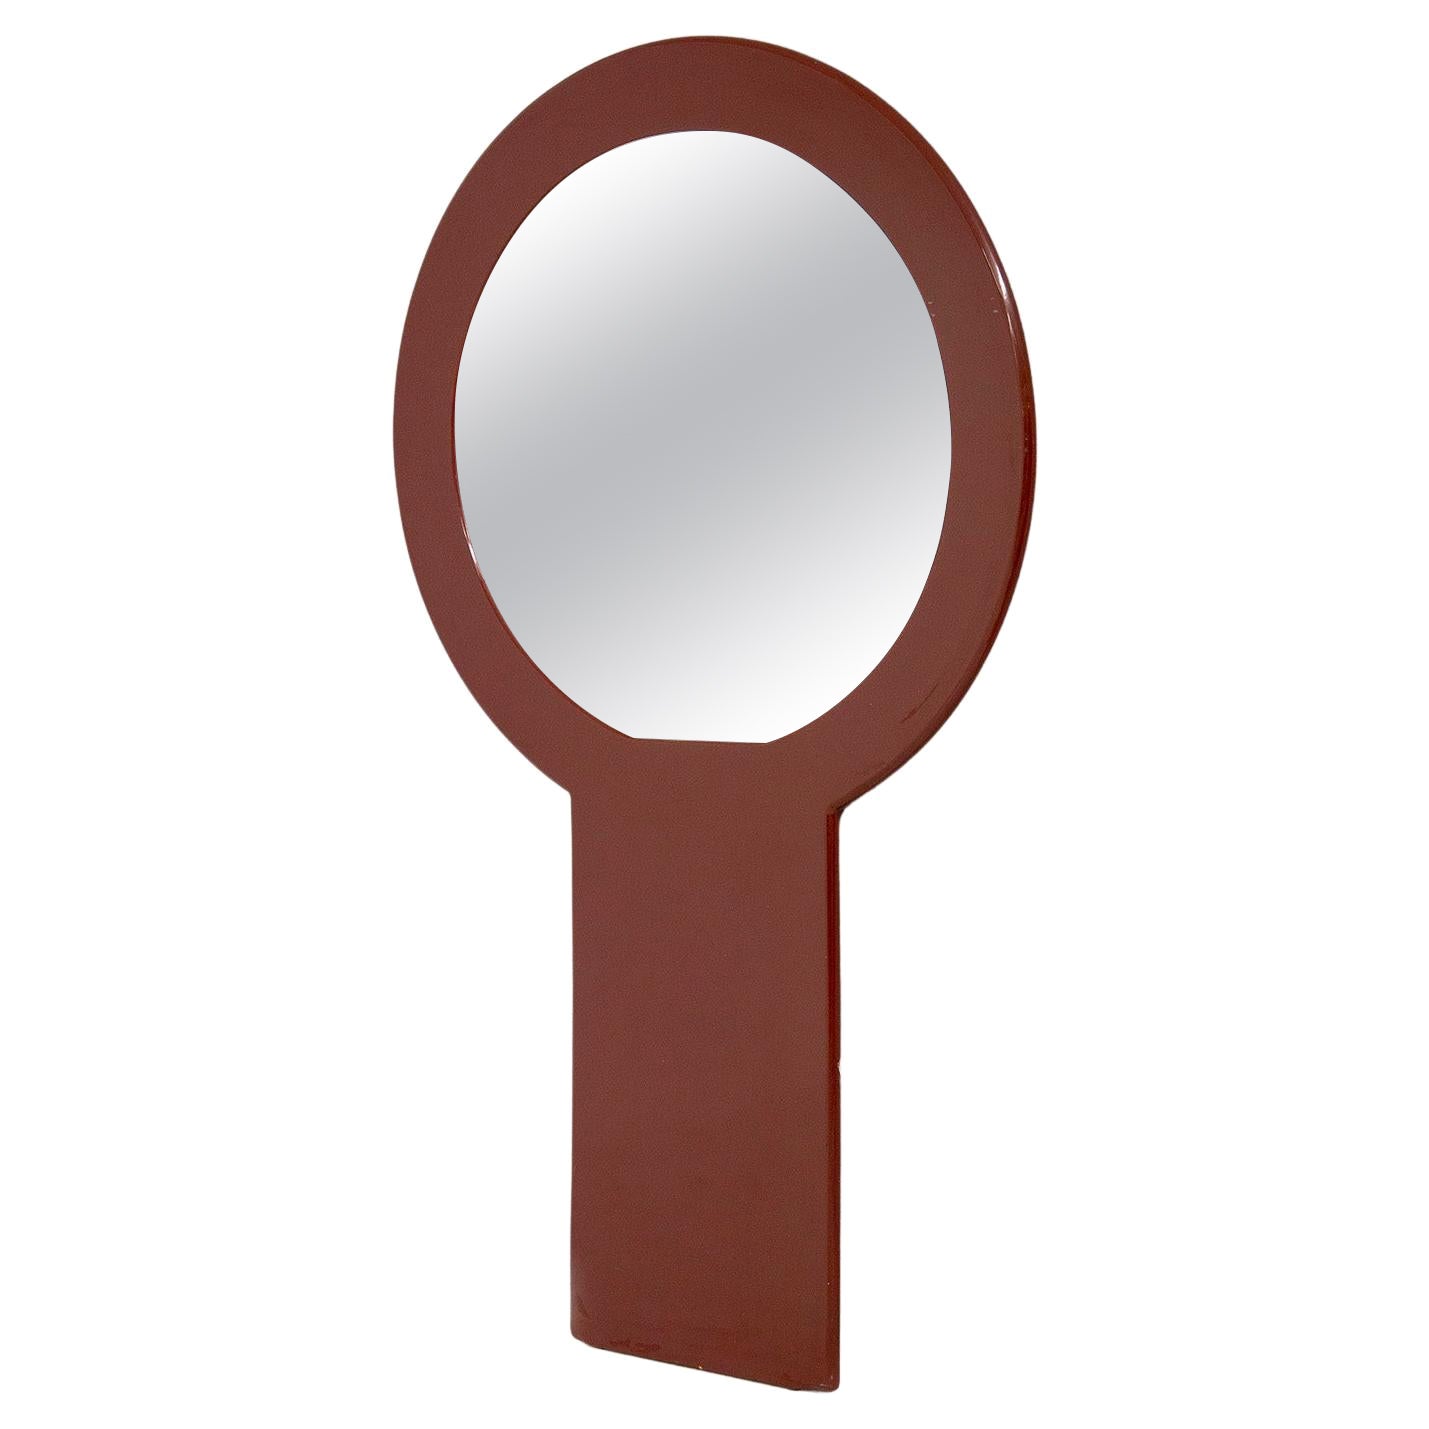 Italian Space Age Wall Mirror by F.Lli Sbrilli in Red Lacquered Wood